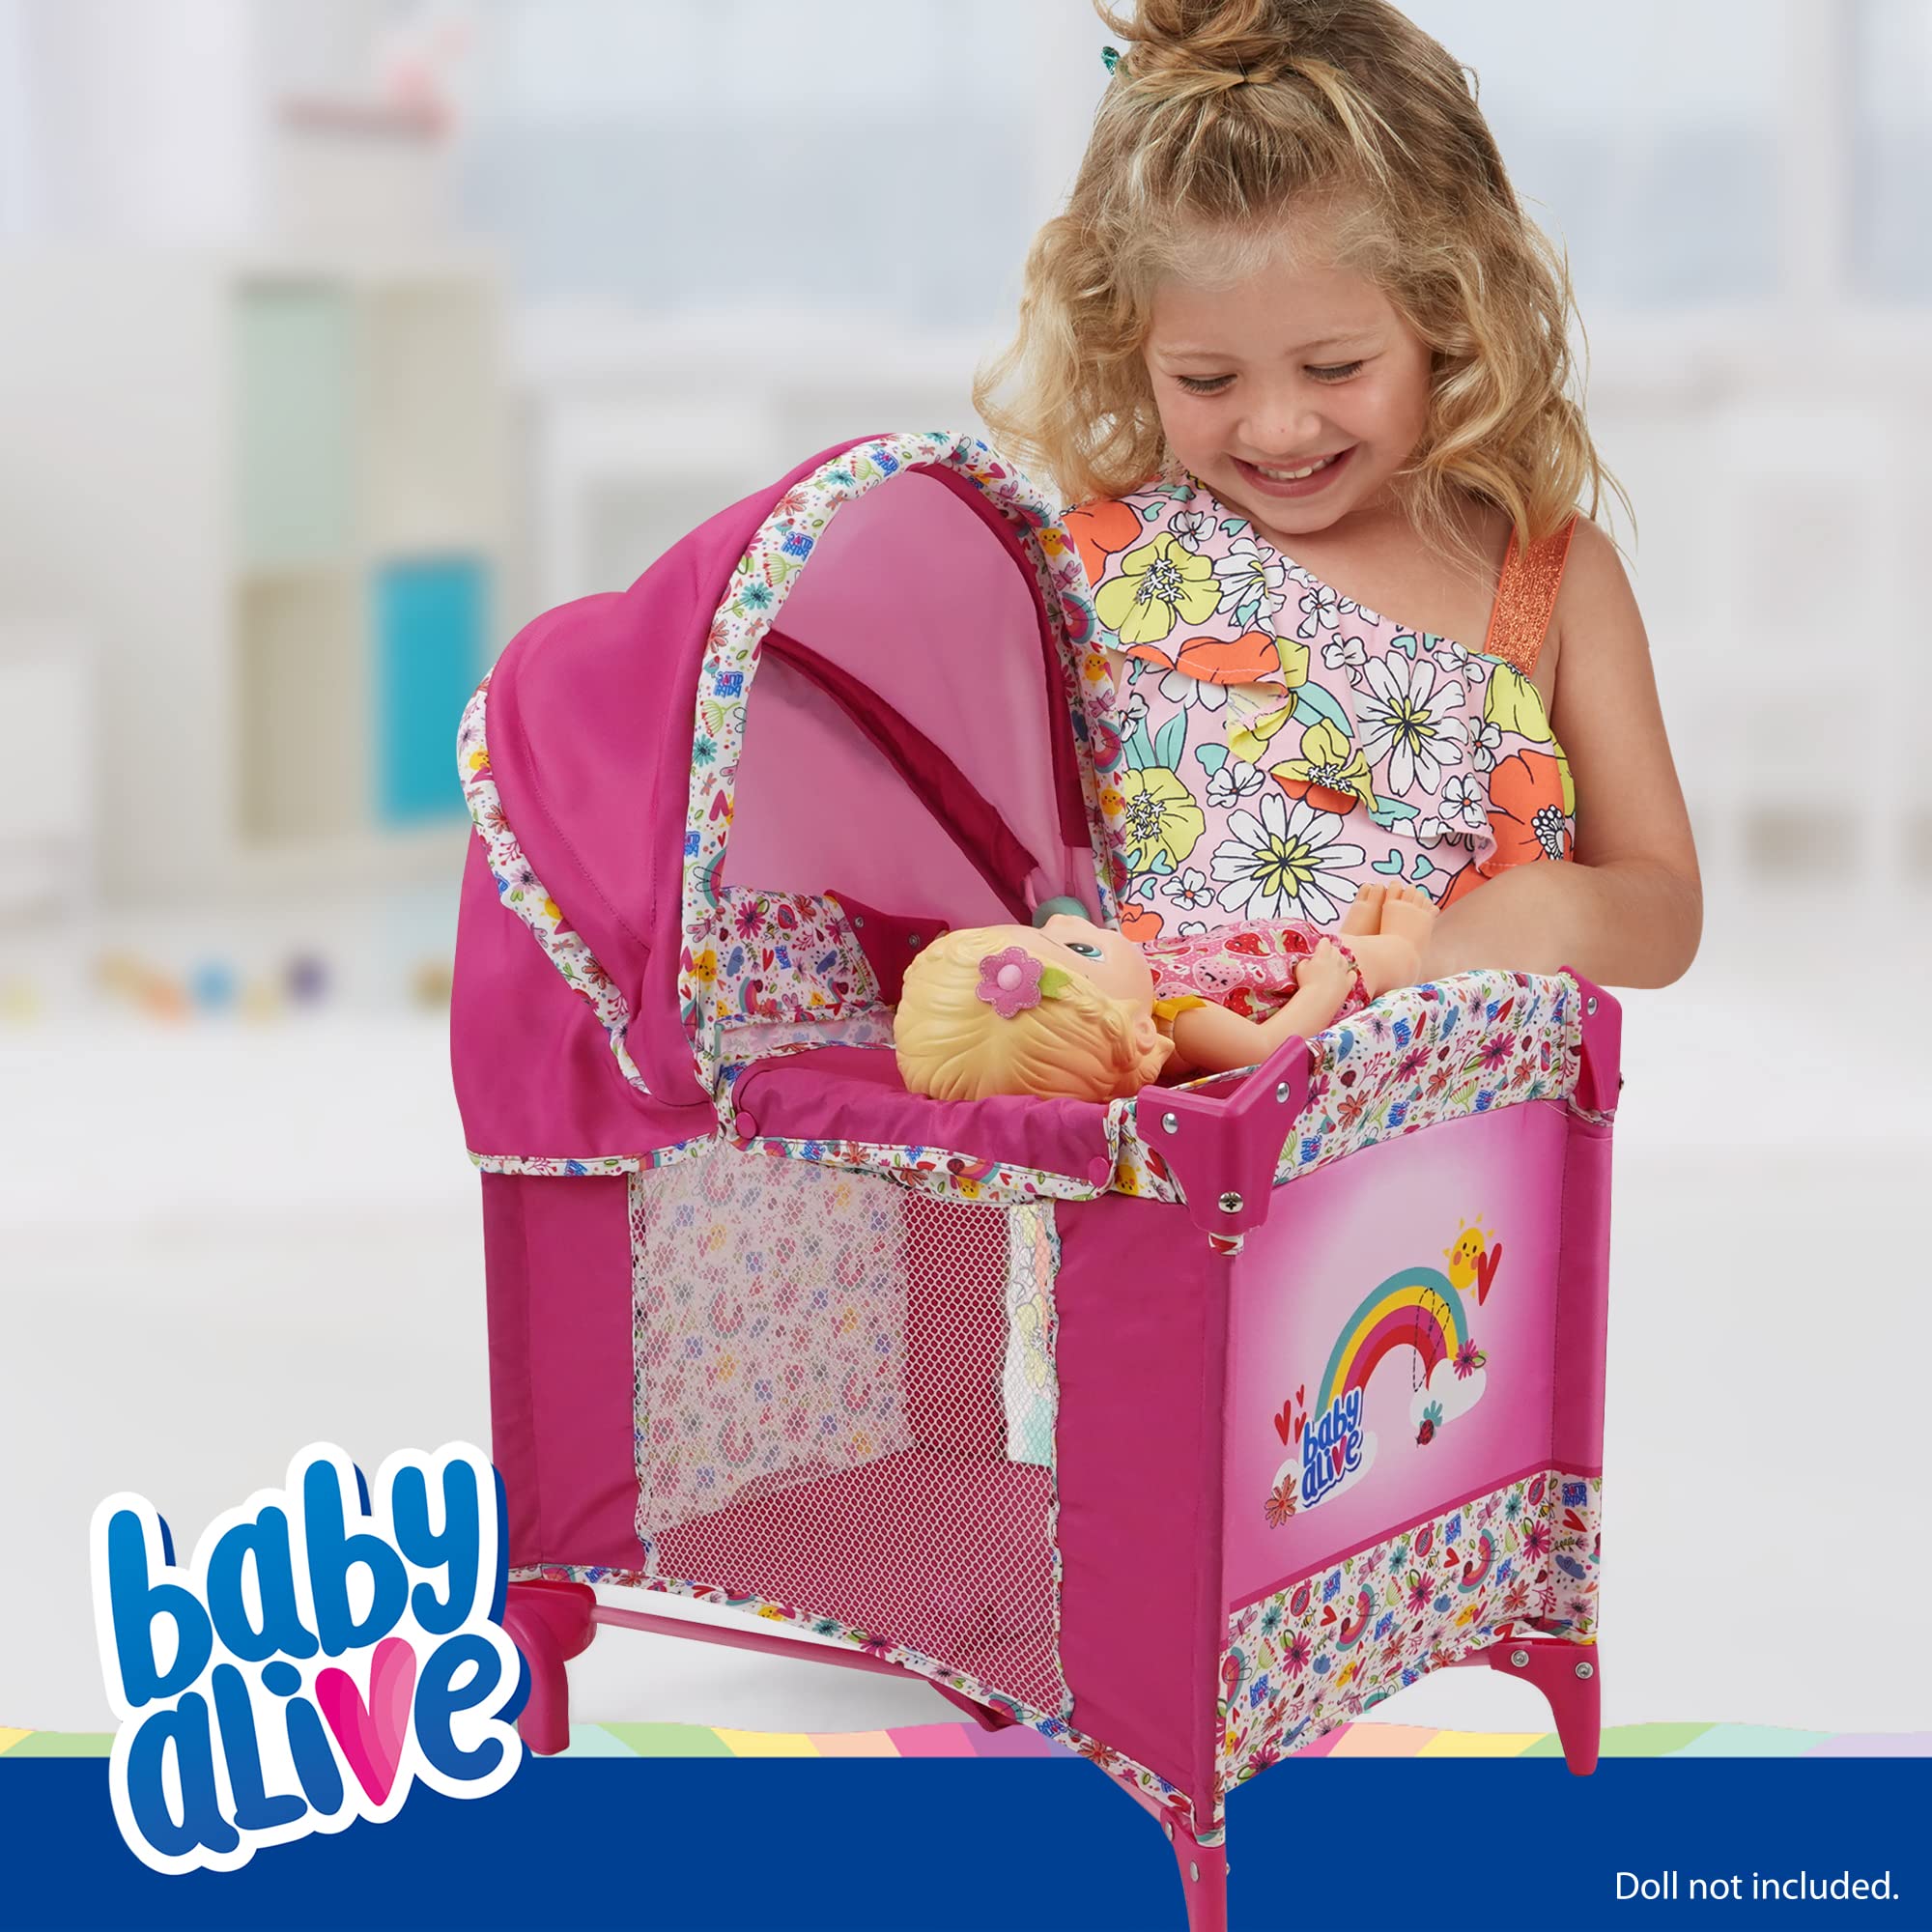 Baby Alive: Deluxe Doll Play Yard - Pink & Rainbow - Fits Dolls Up to 18